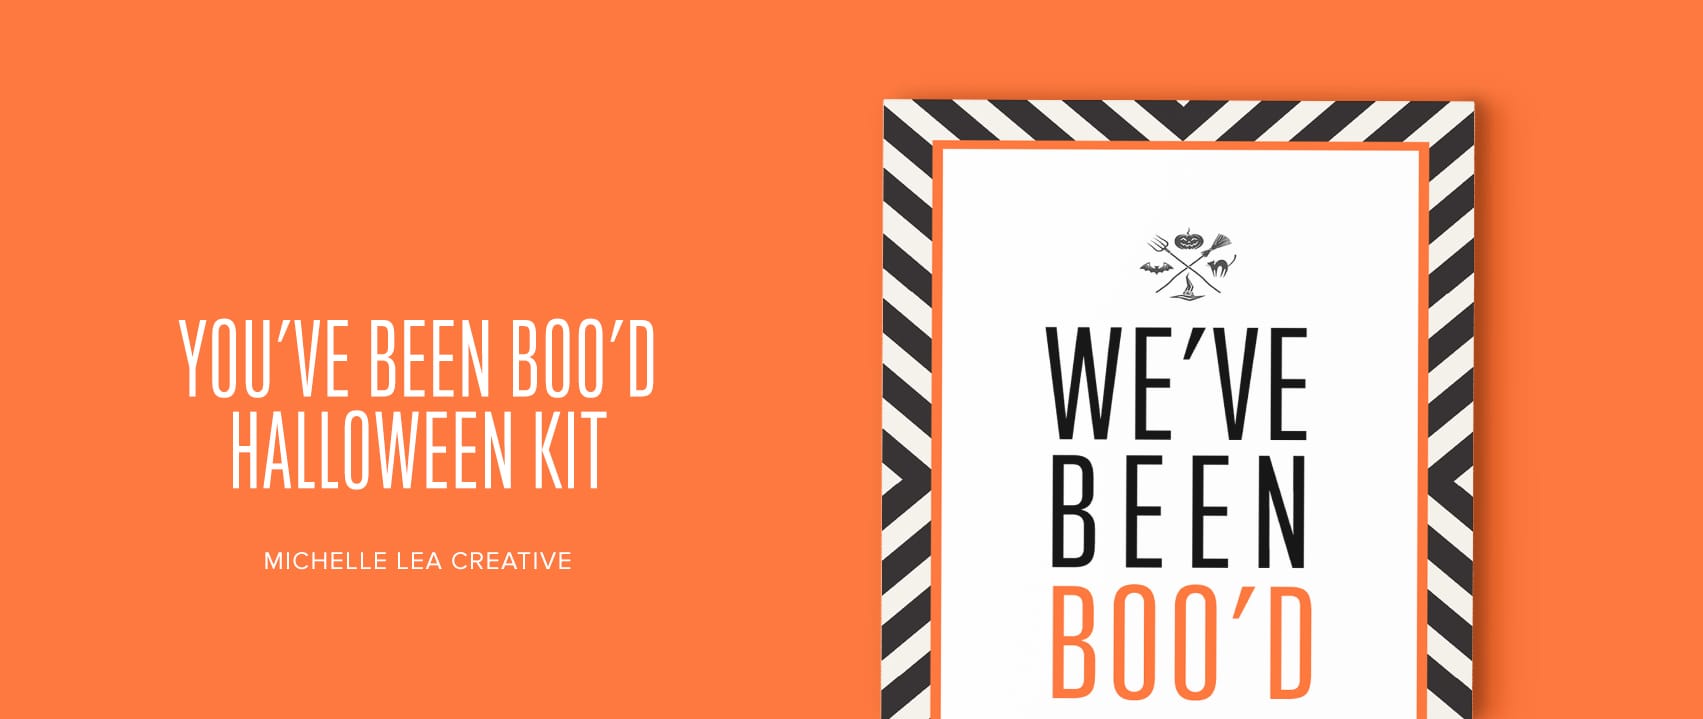 You’ve Been Boo’d Halloween Kit